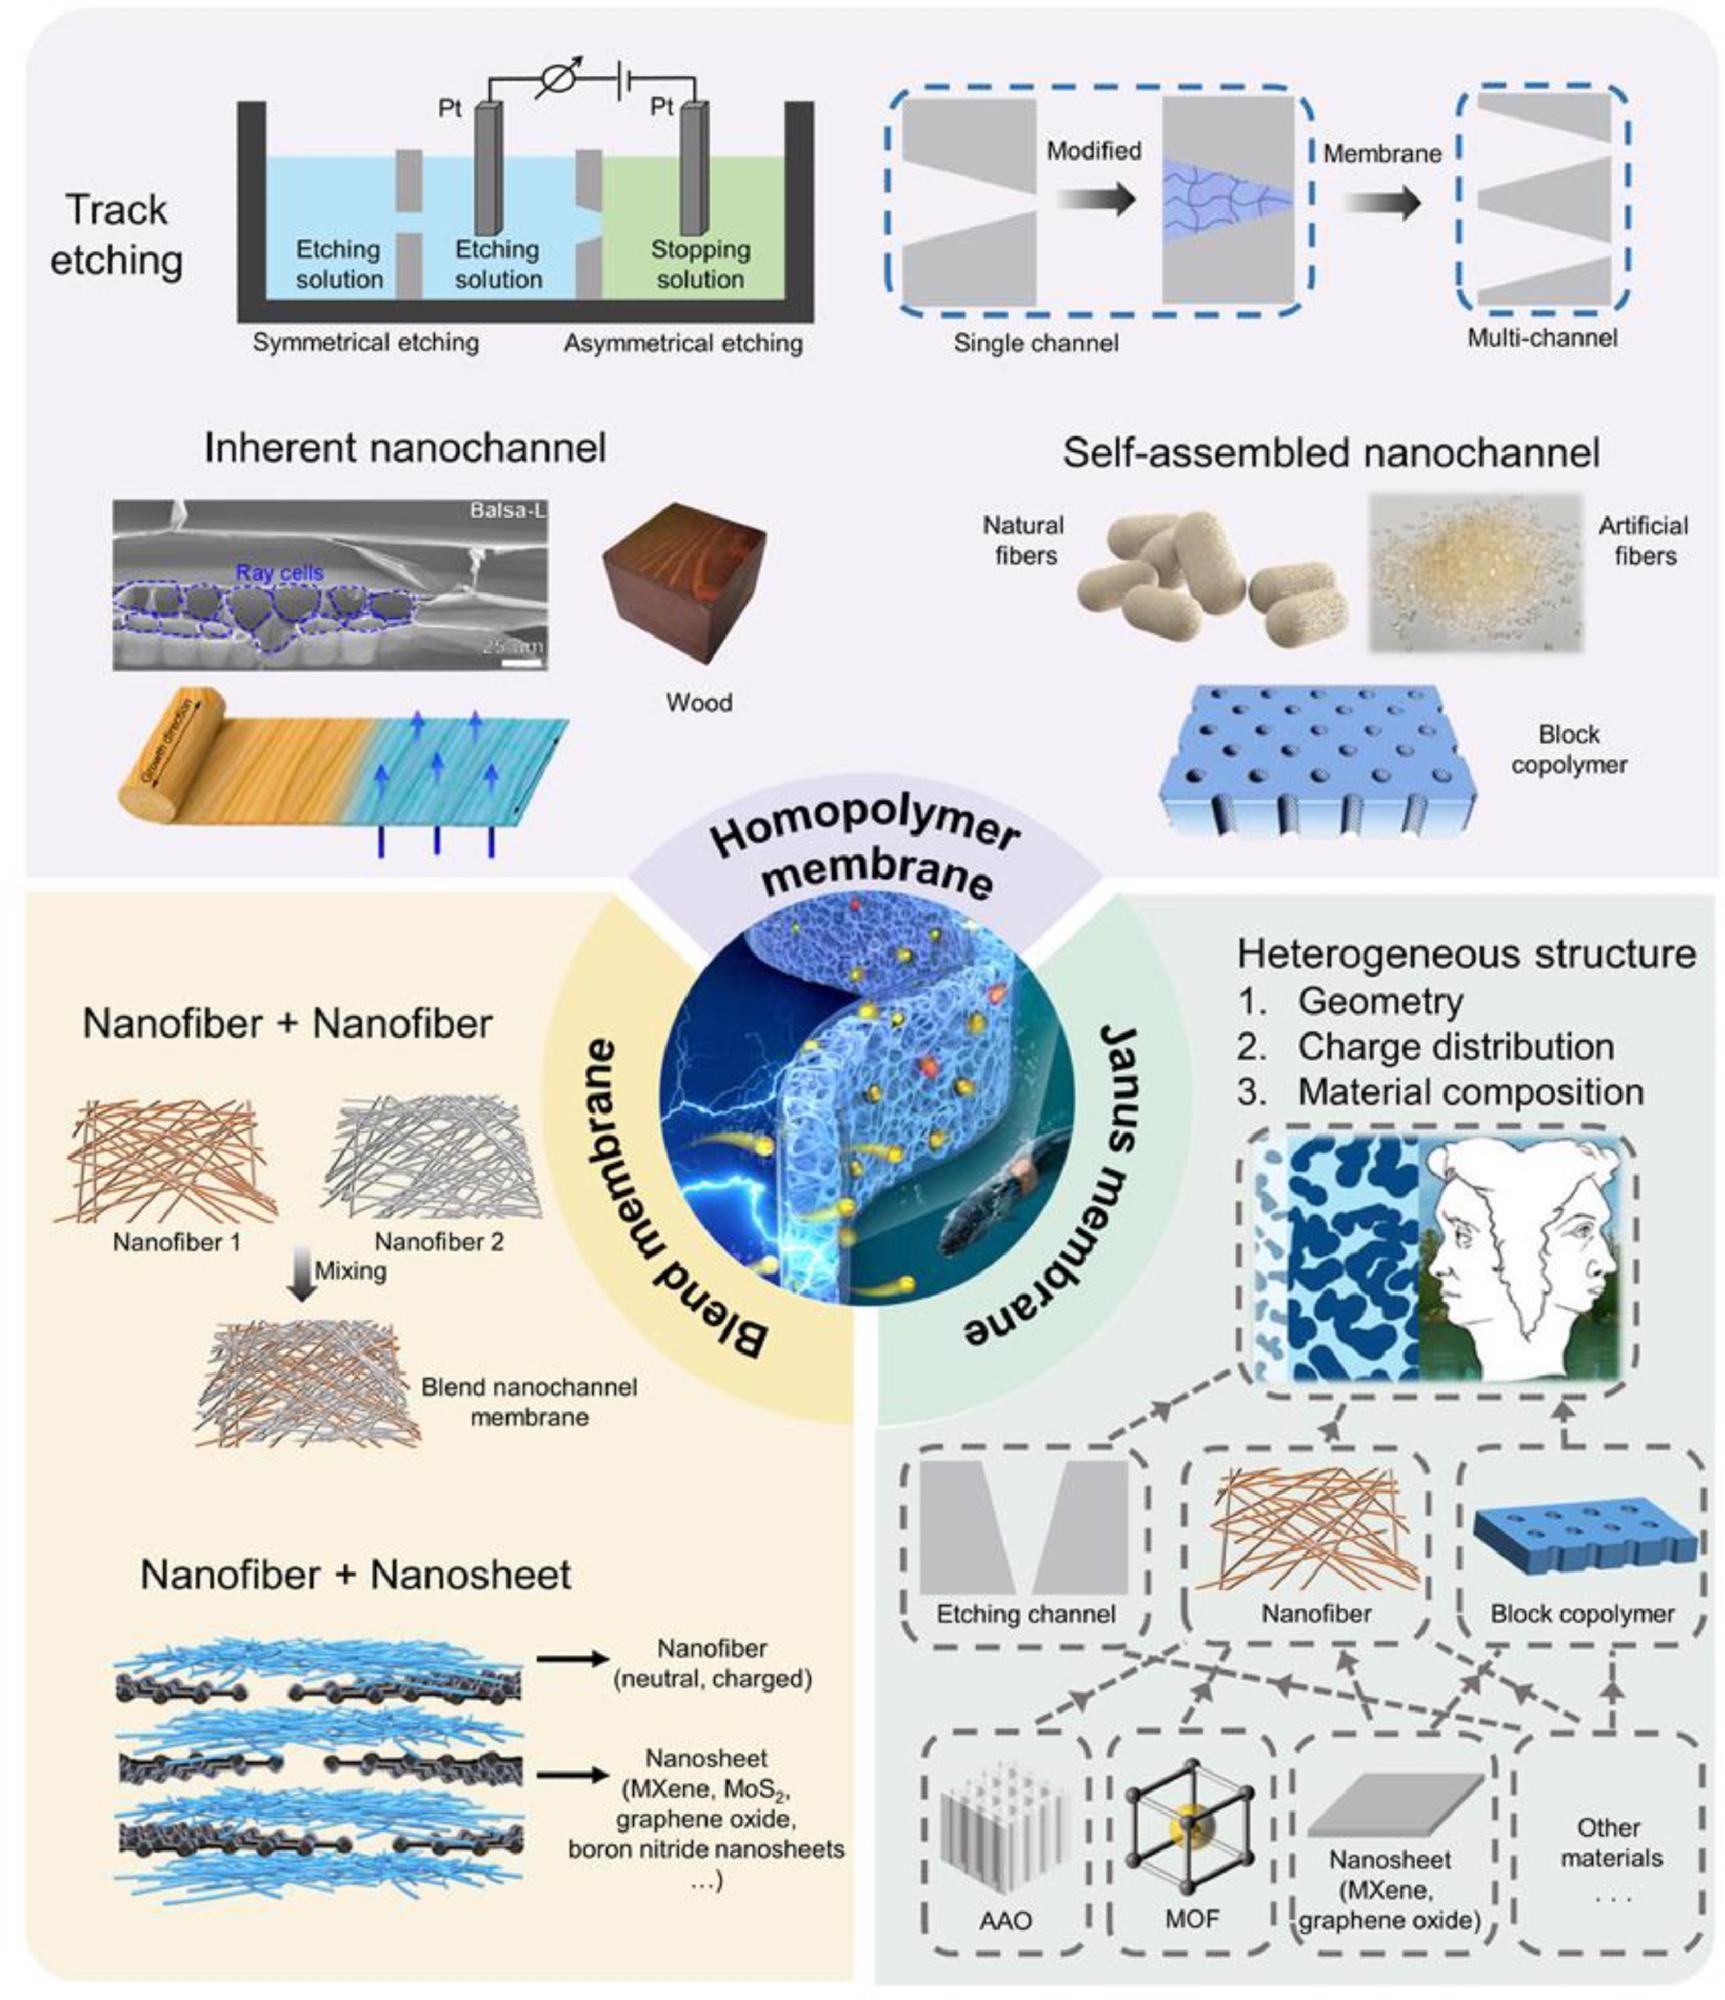 Bioinspired nanochannel membranes based on polymeric materials for osmotic energy conversion.